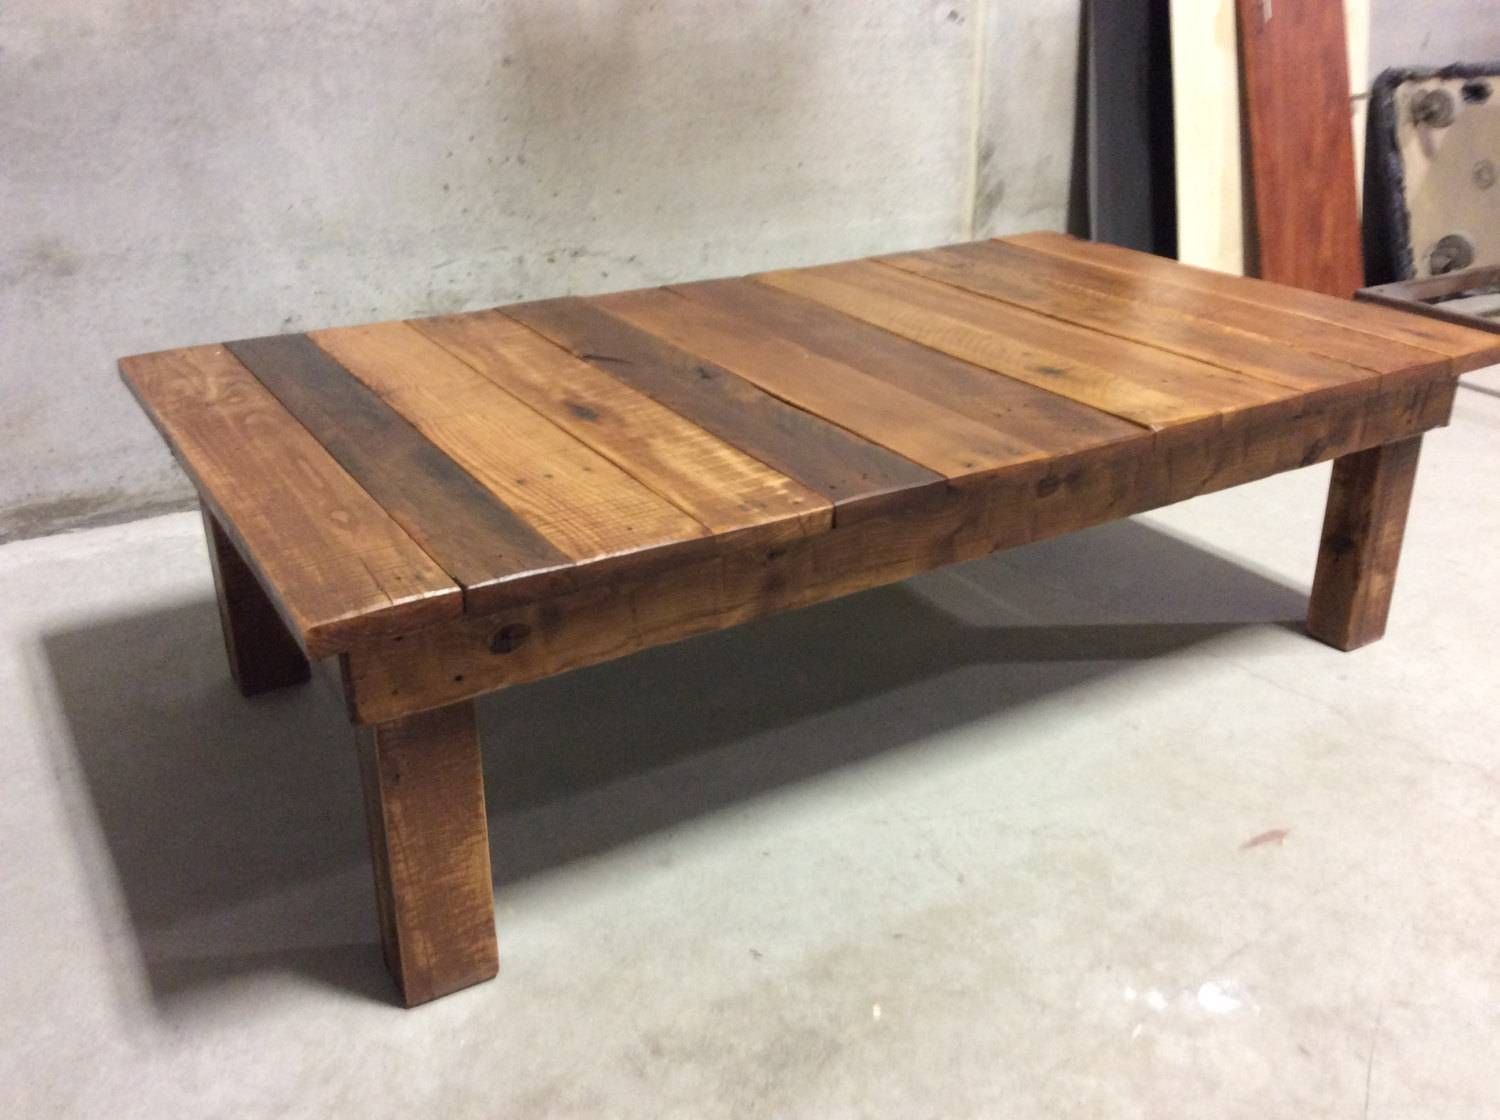 Large Reclaimed Wood Coffee Table Within Large Wood Coffee Tables (View 13 of 15)